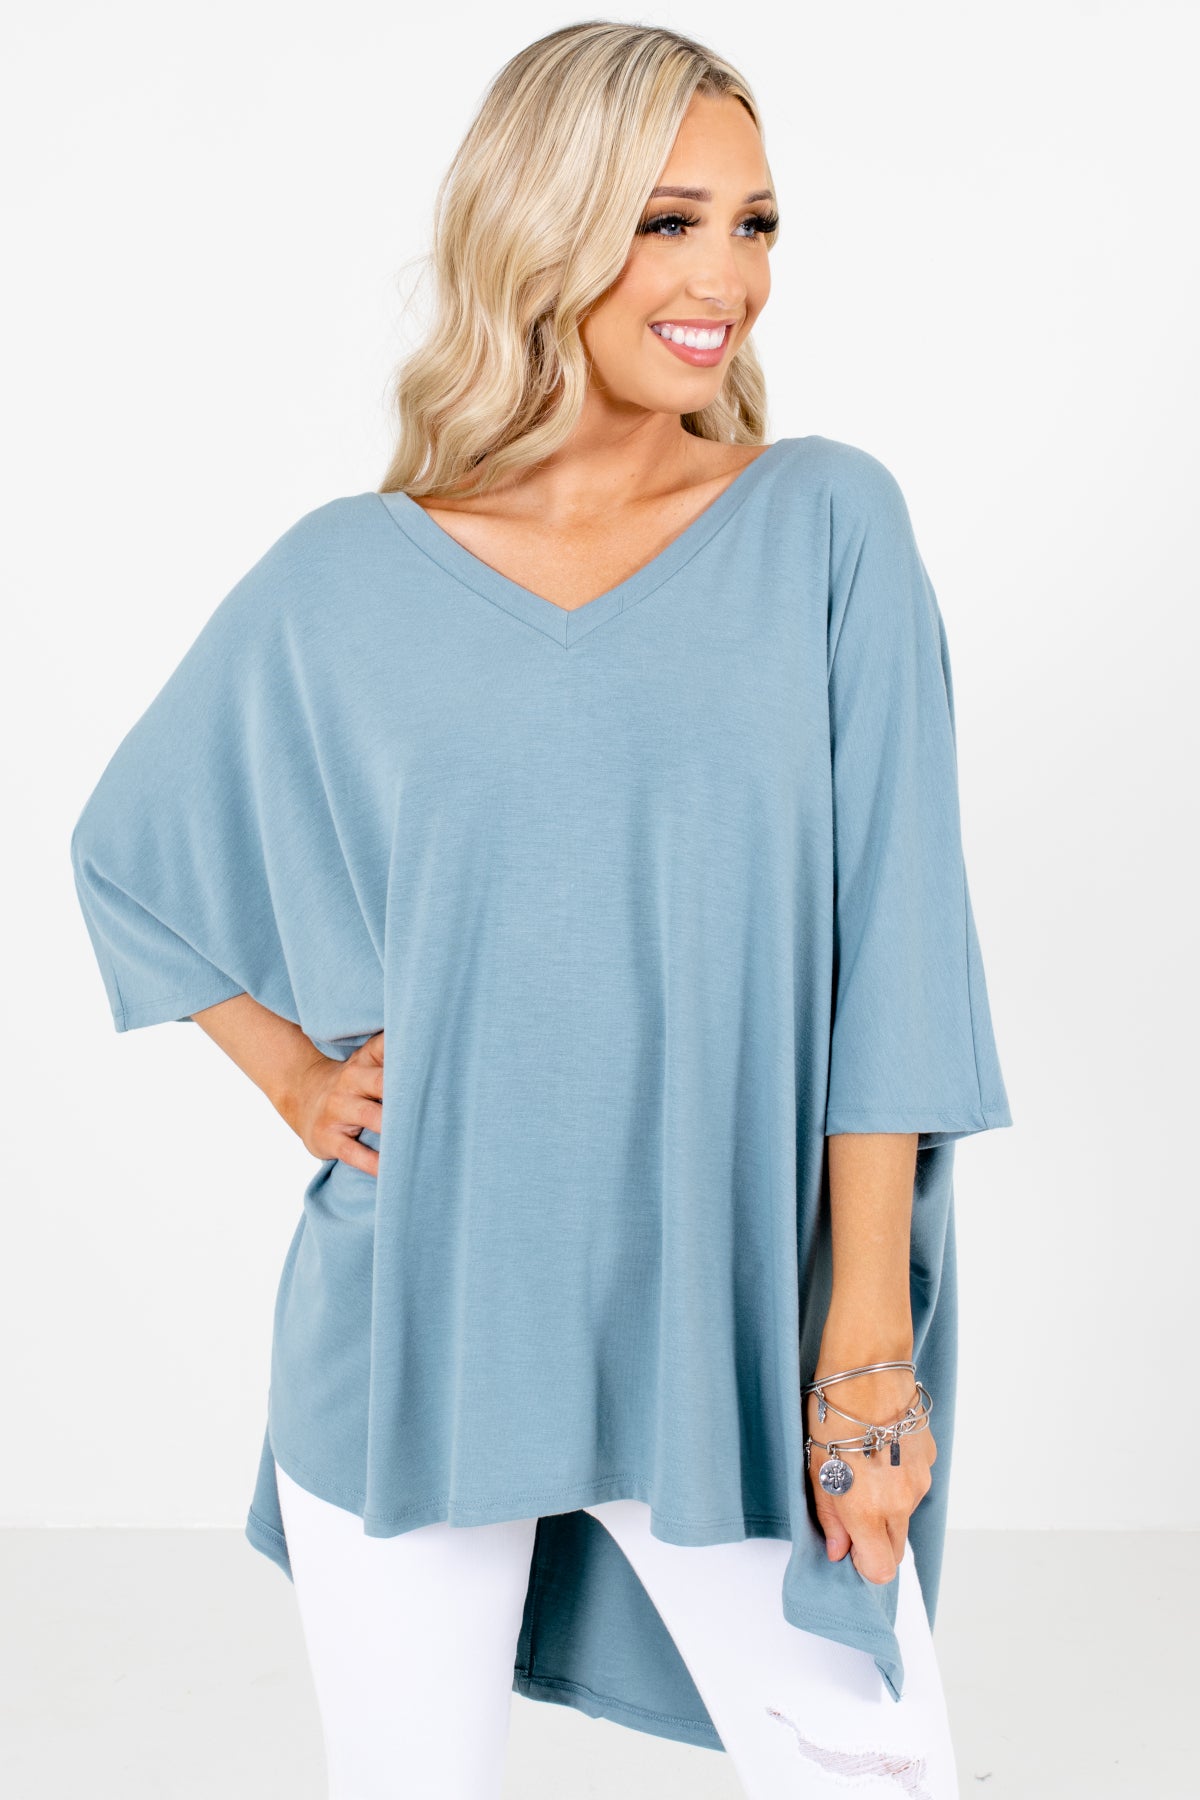 Blue Cute and Comfortable Boutique Tops for Women